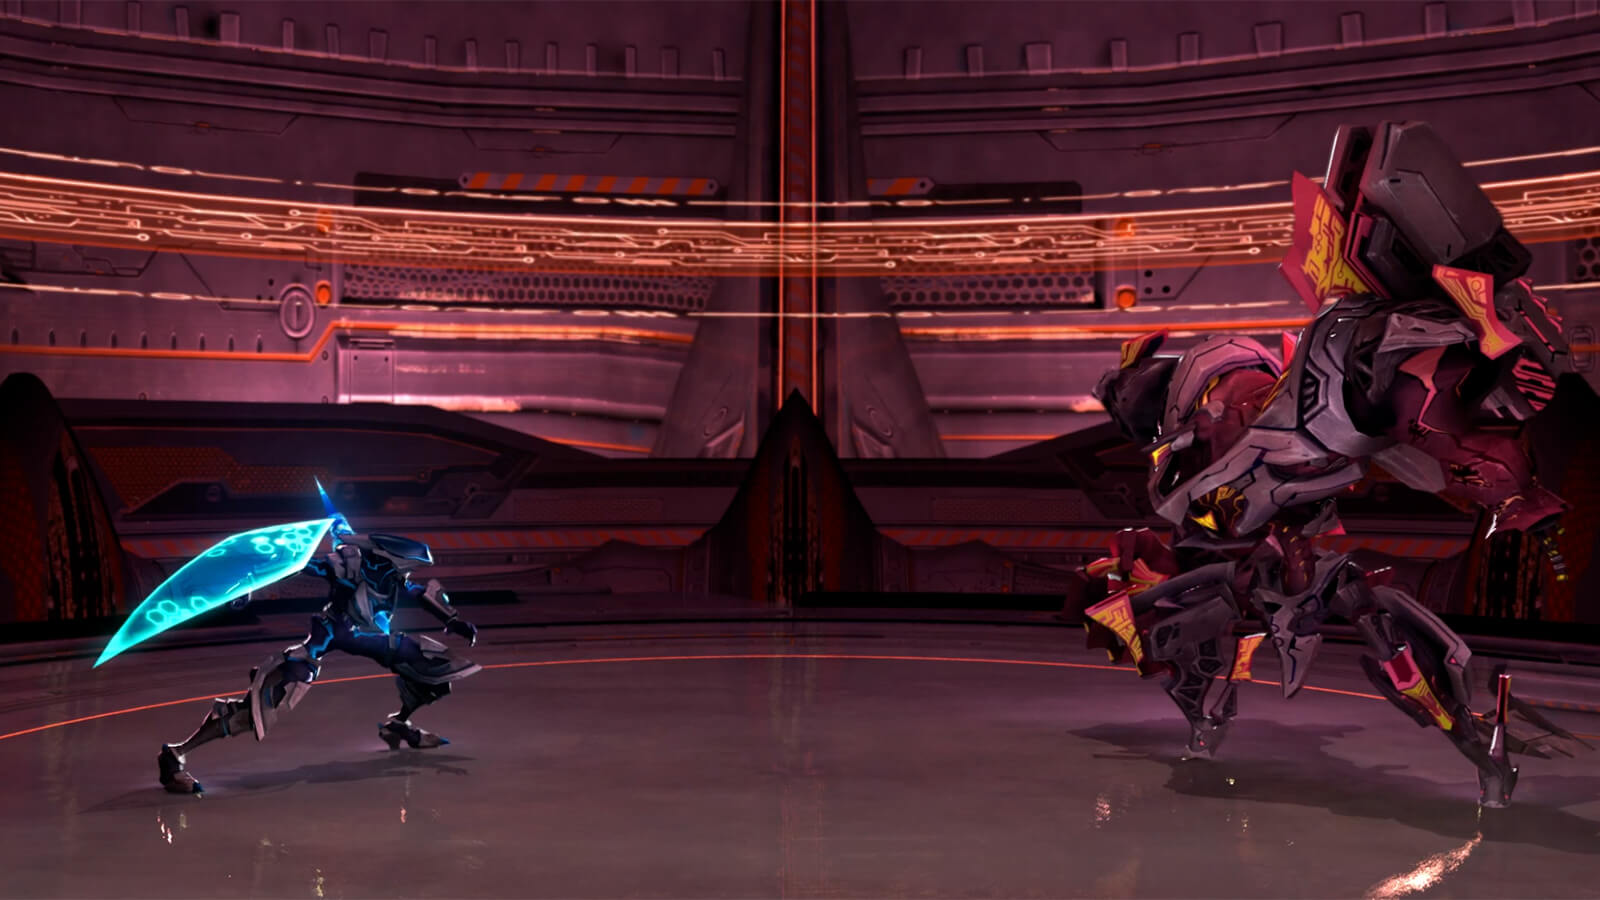 A robot holding a glowing blue shield faces off against a larger maroon robot in a reddish-hued metallic room